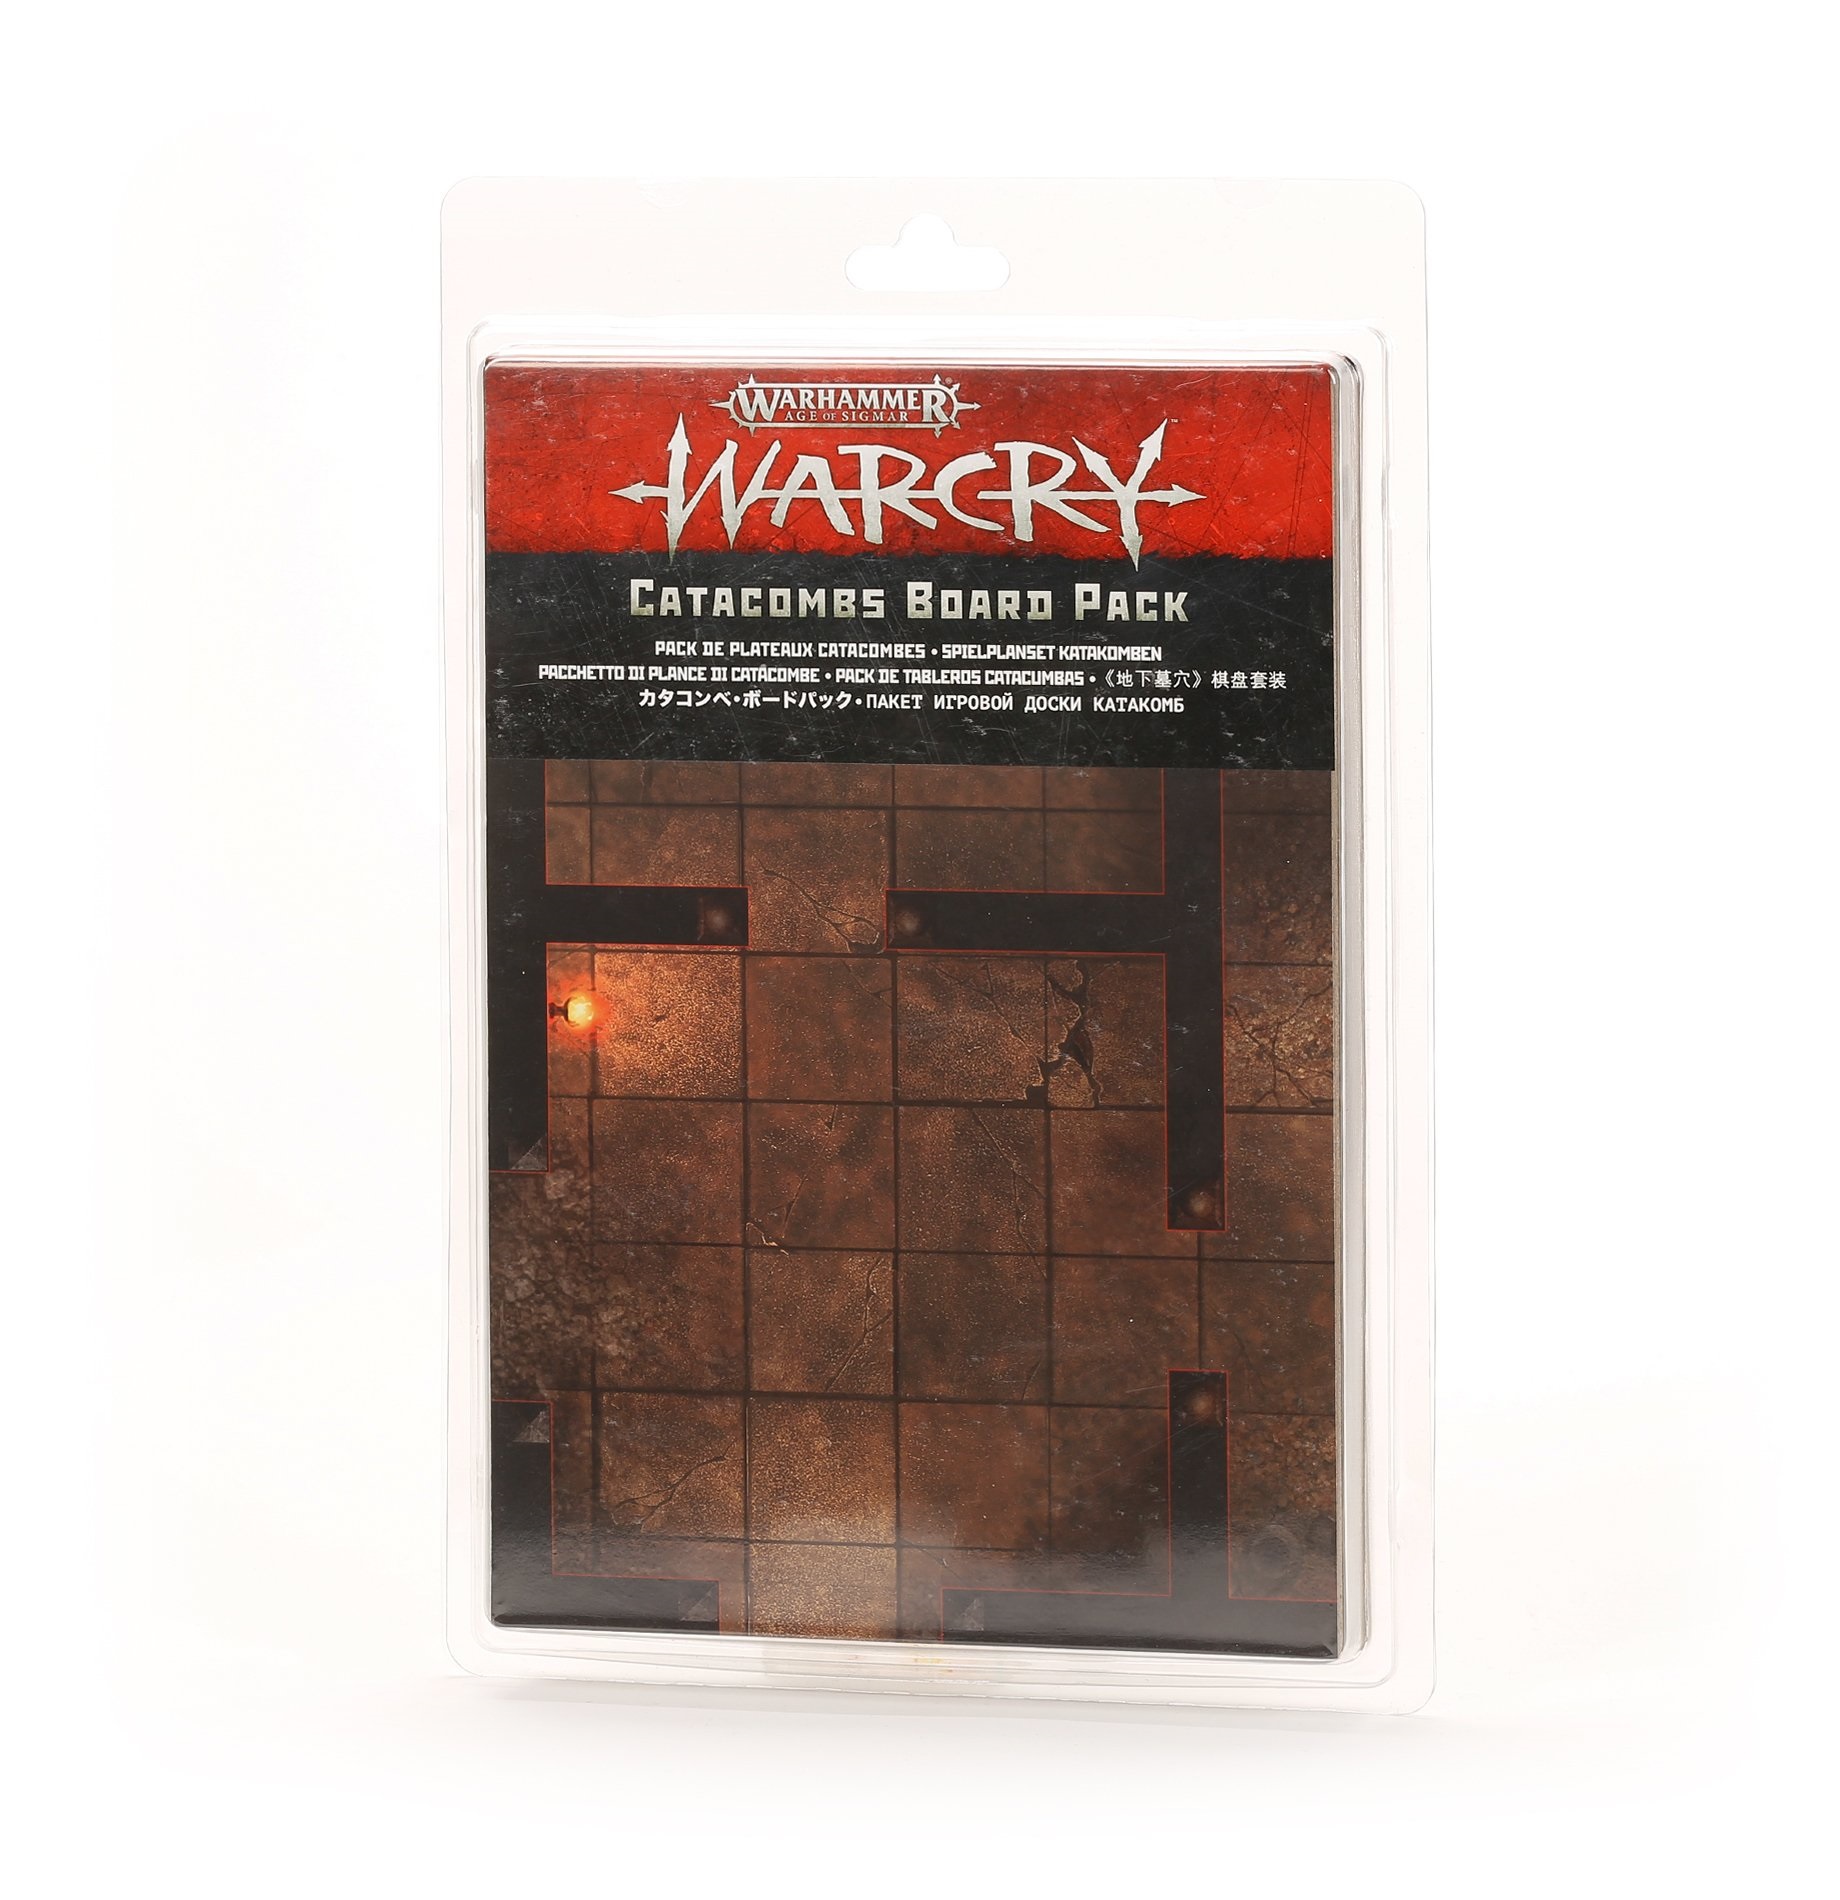 Warcry: Catacombs Board pack - 30% Discount 